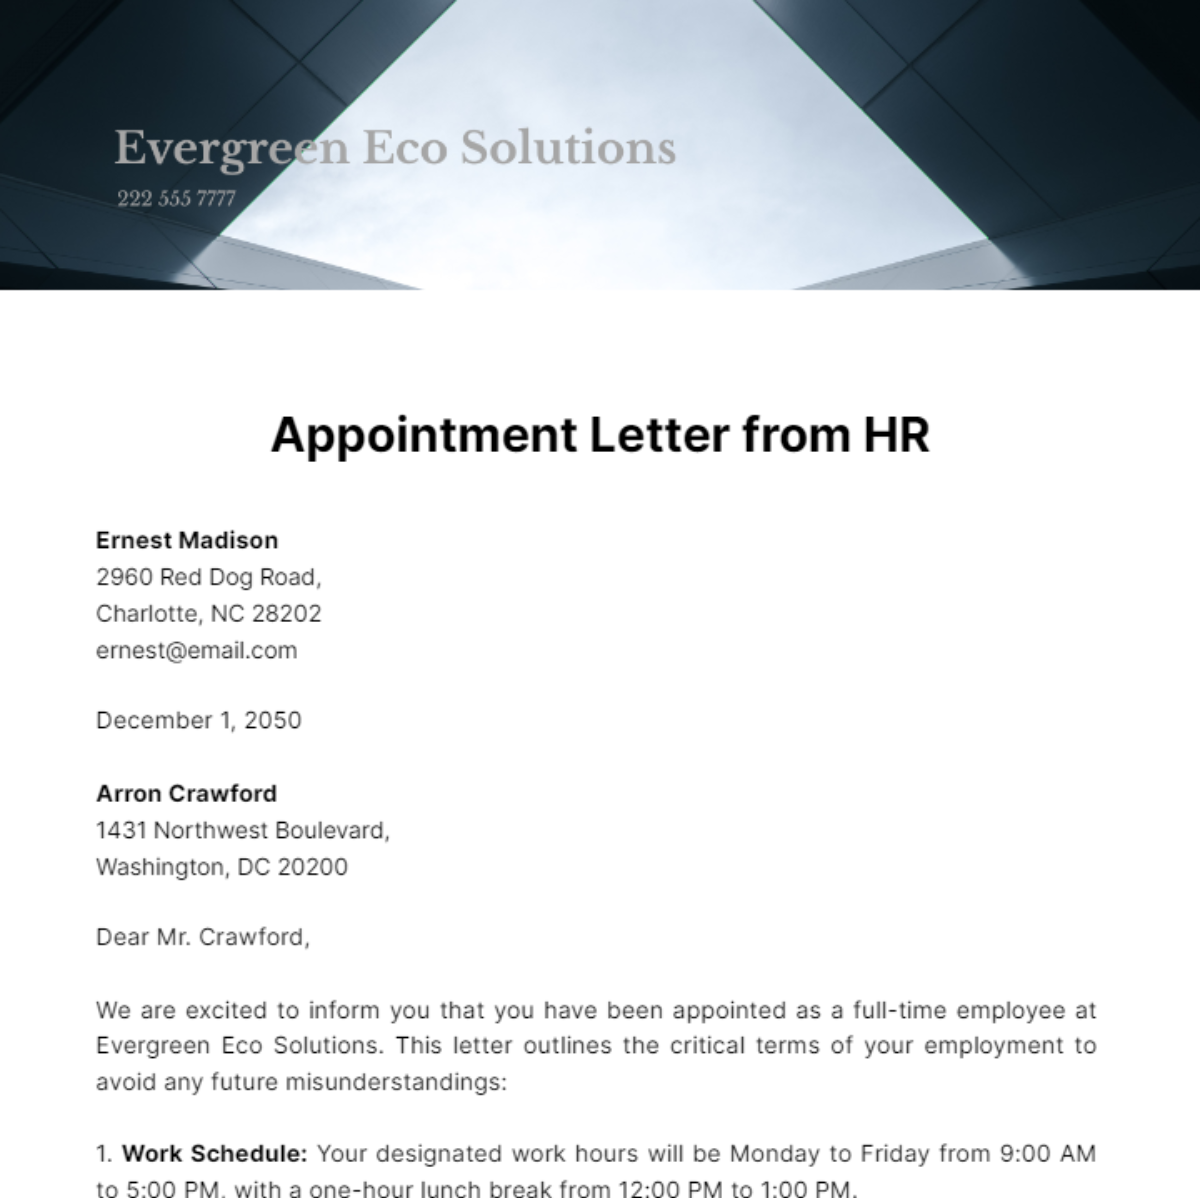 Appointment Letter from HR Template